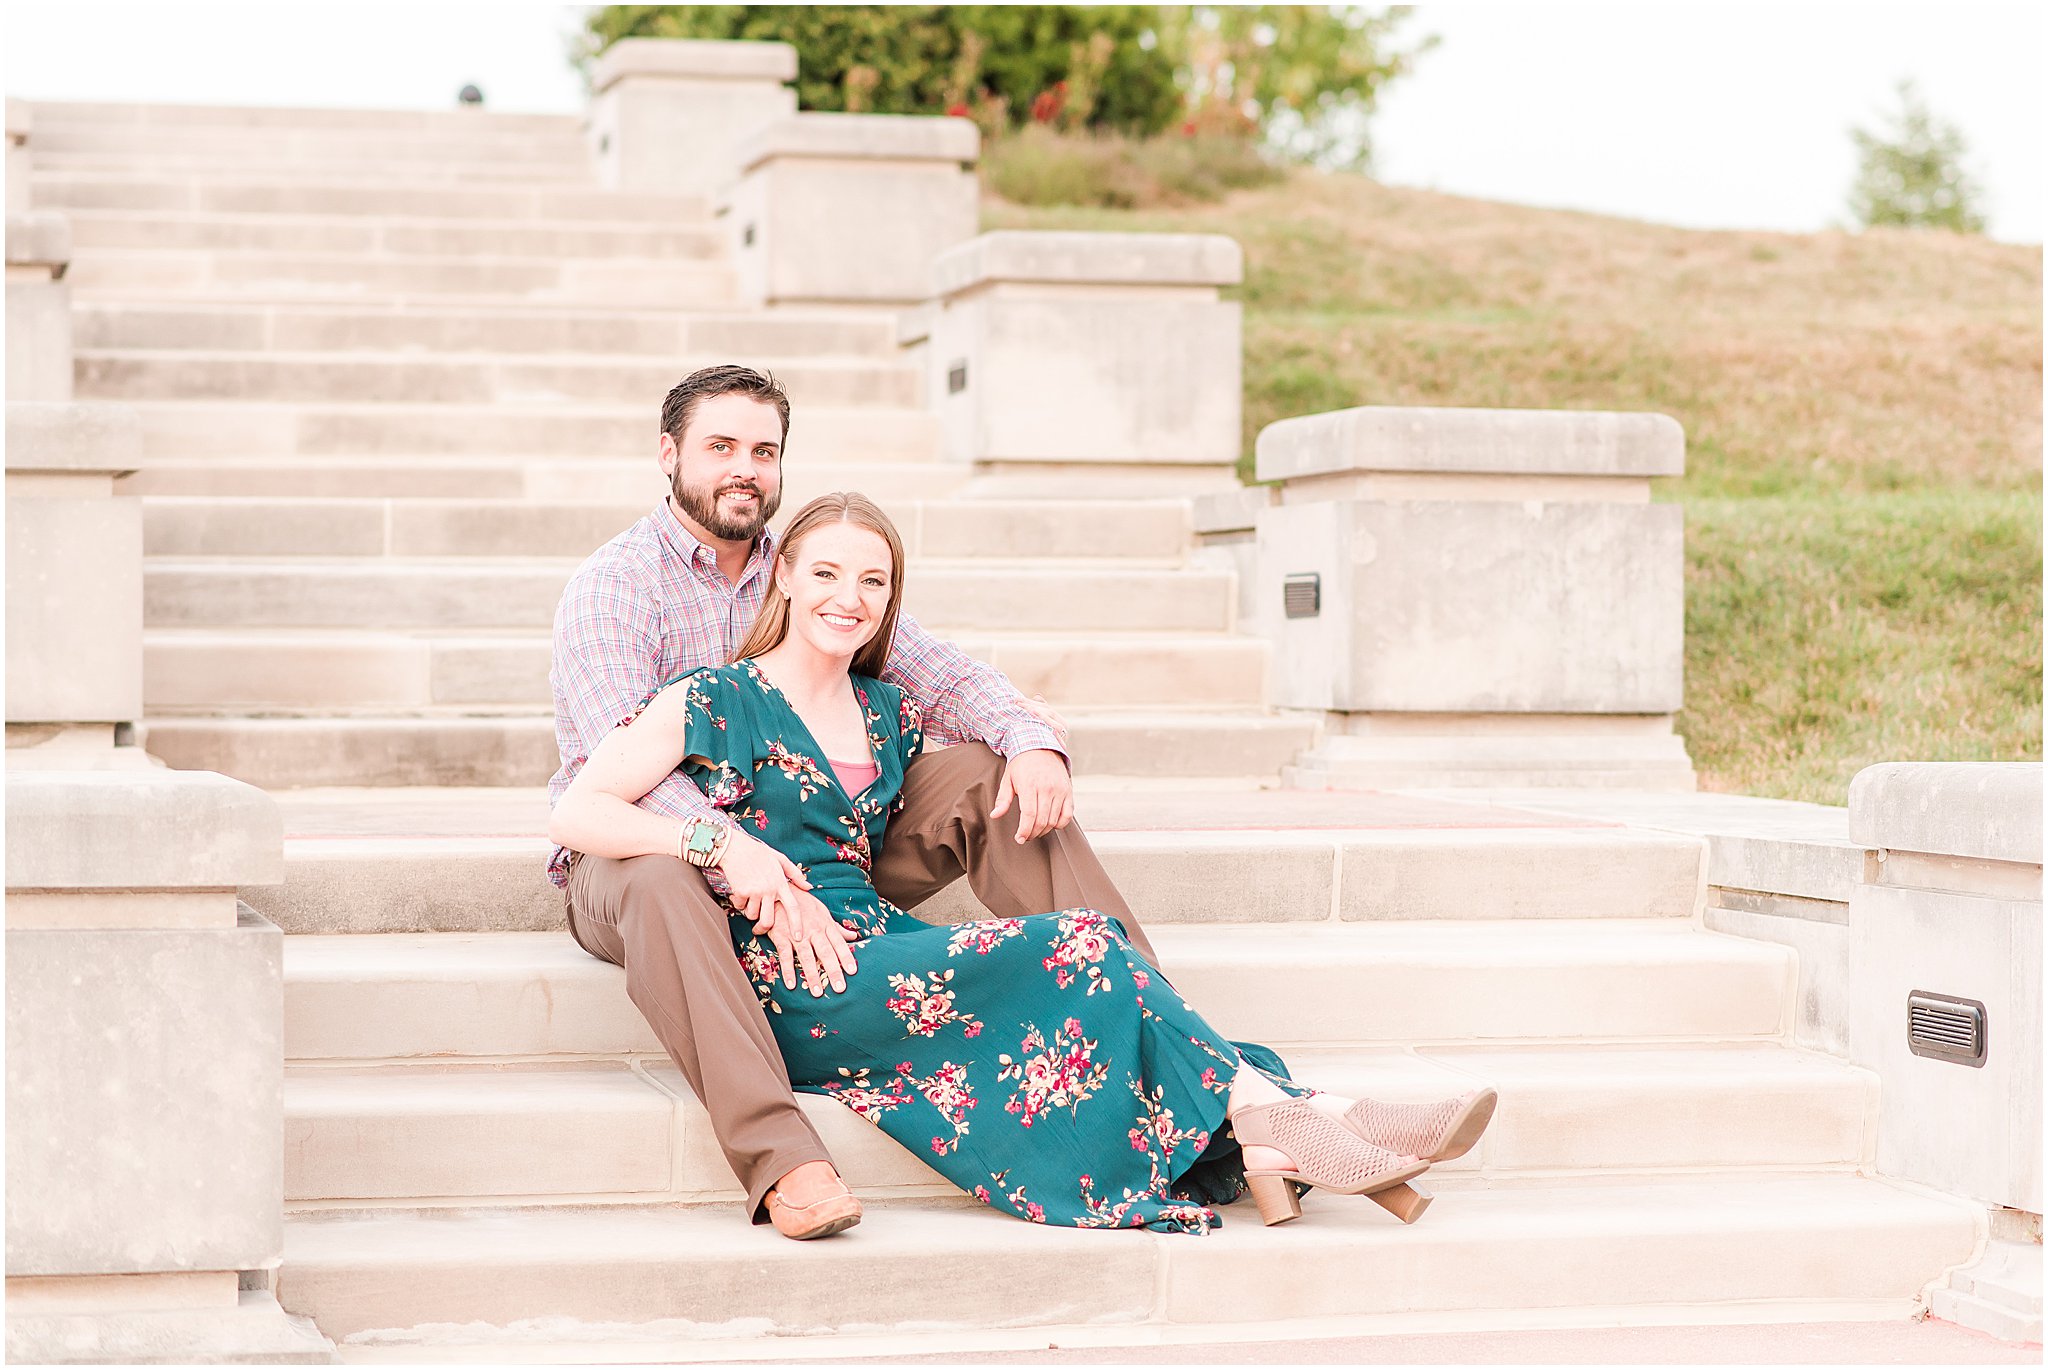 Bride and groom sitting and snuggling on stairs during Coxhall Gardens engagement session